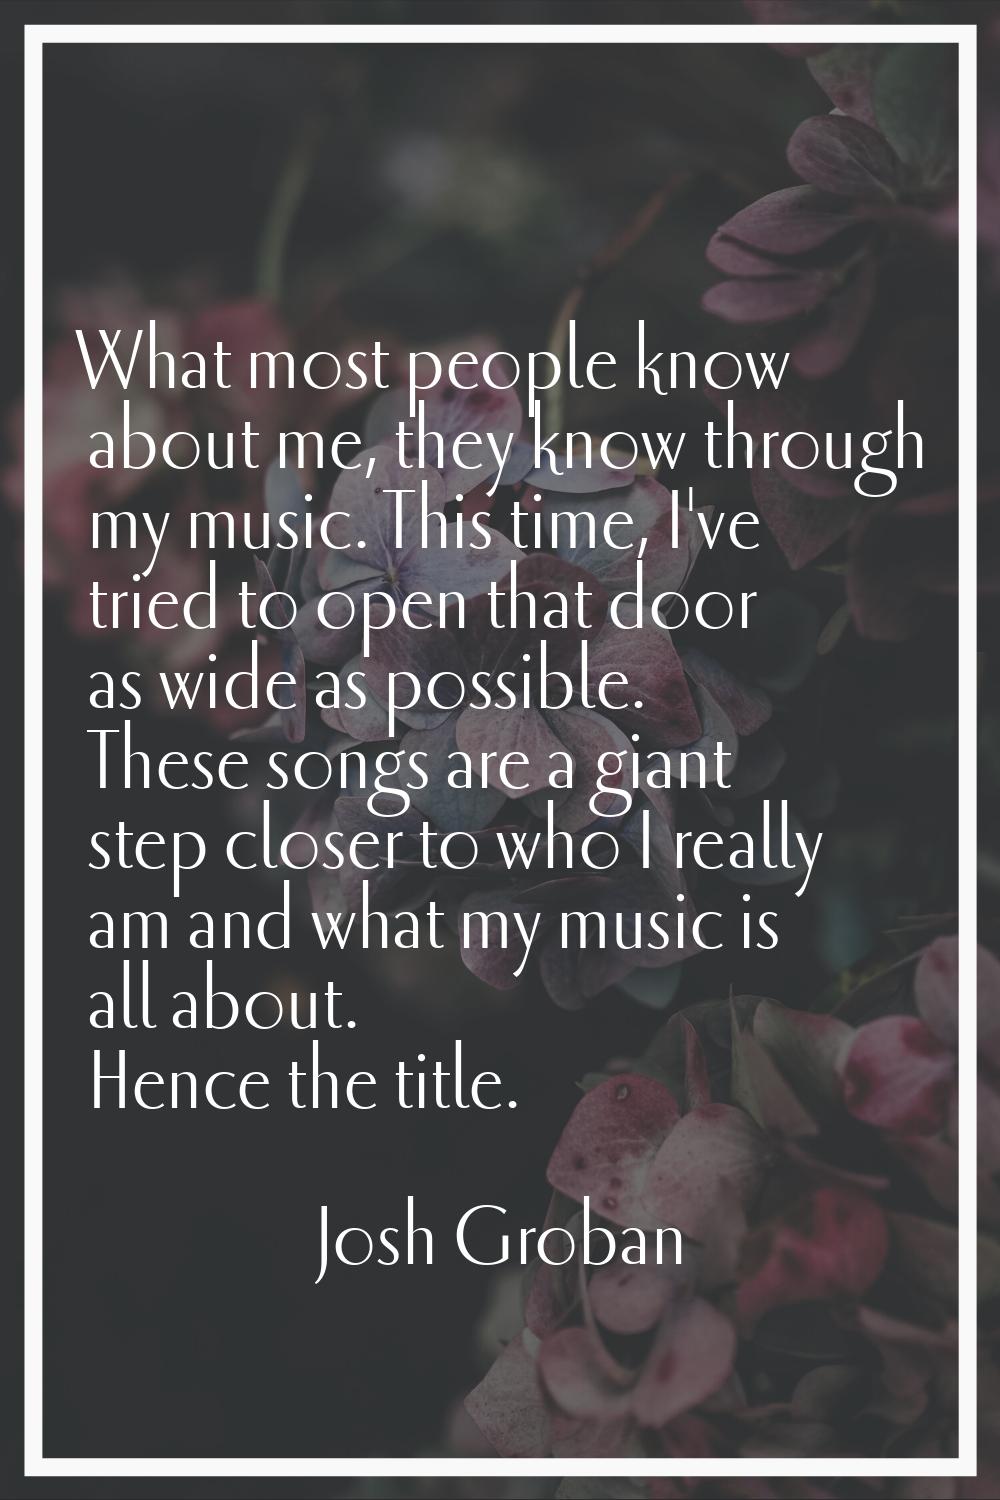 What most people know about me, they know through my music. This time, I've tried to open that door